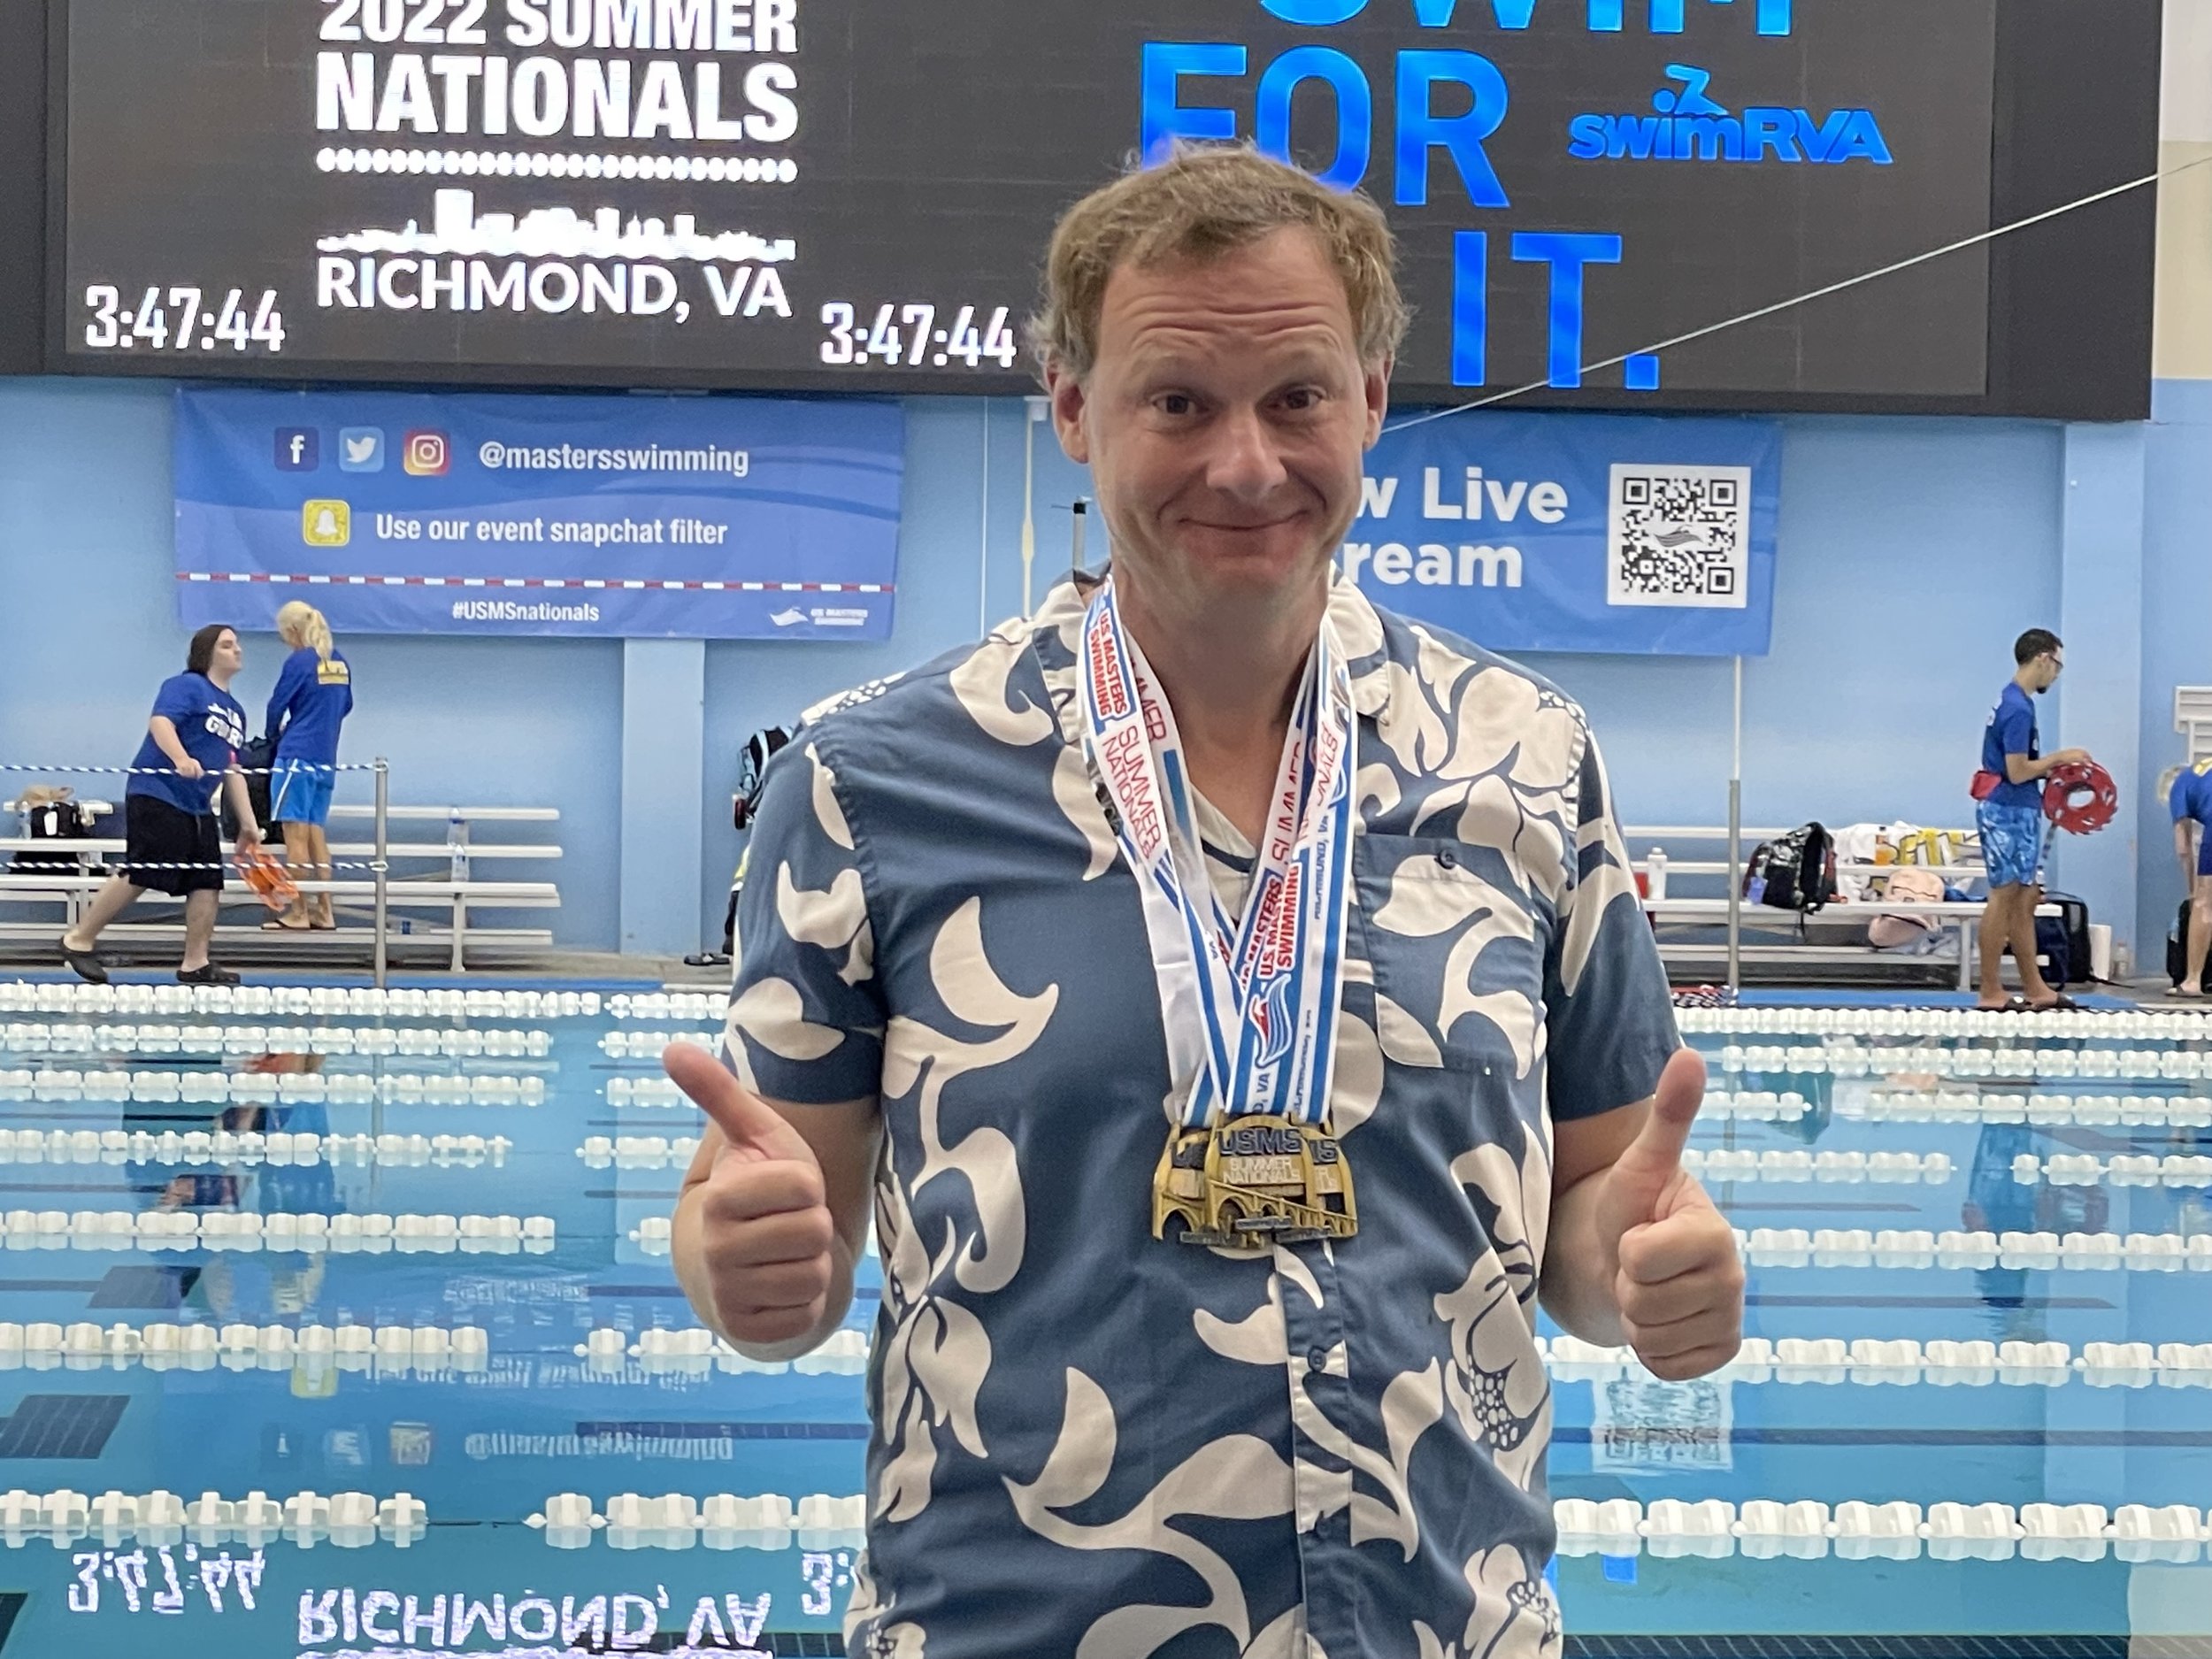 Long time masters swimmer, first time nationals swimmer at USMS Summer Nationals — New England LMSC